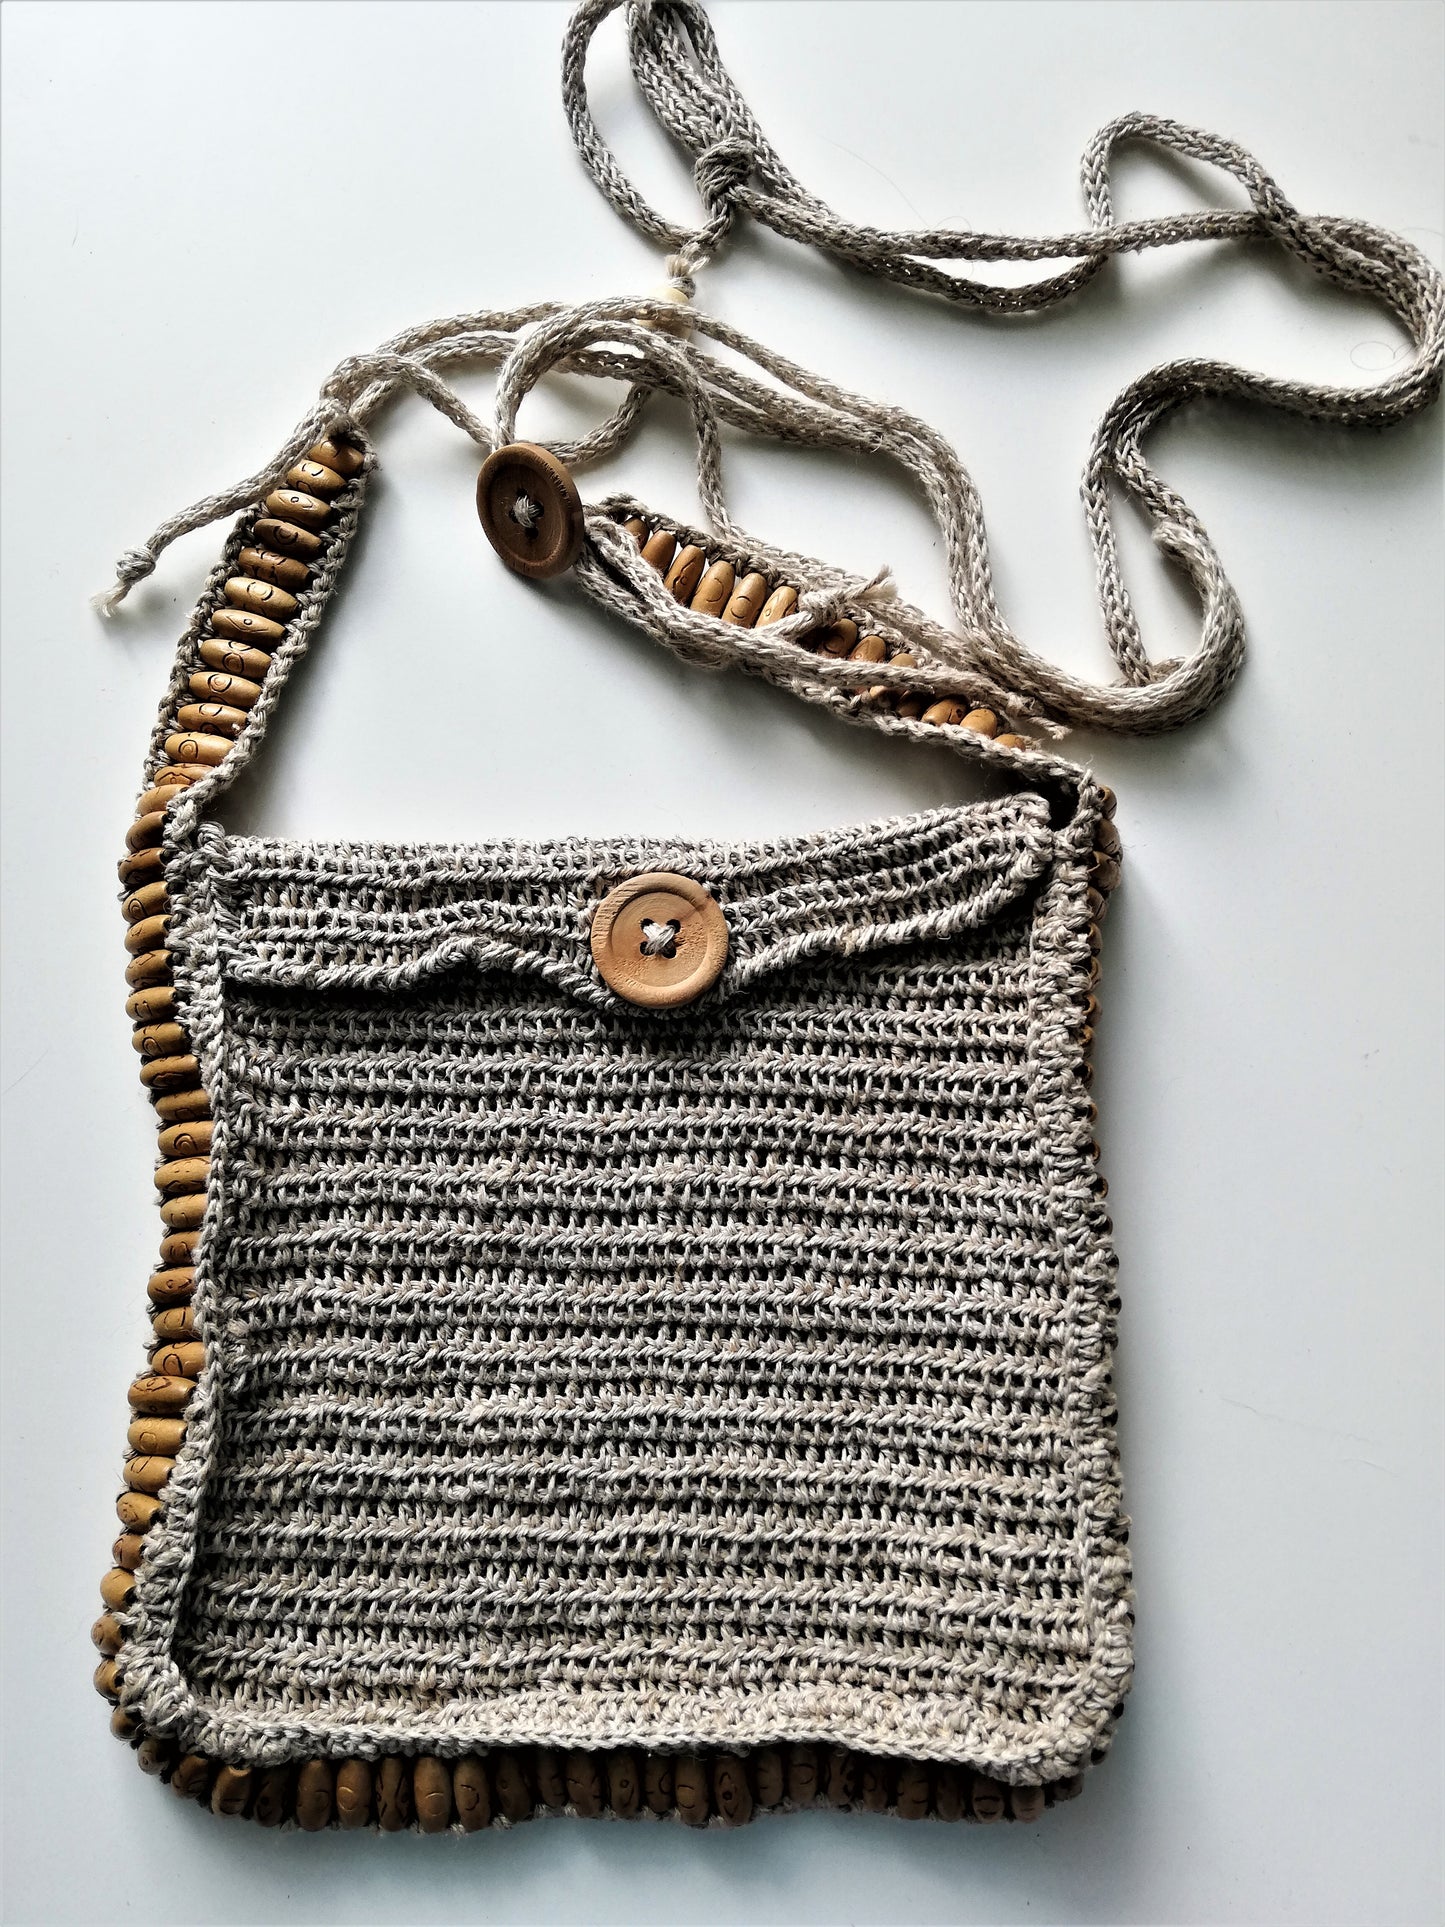 Knitted linen bag with decorative wooden elements / button closure and long (59 cm) shoulder handle (width 15 cm / height 15 cm / thickness 2 cm) (ÉPO)